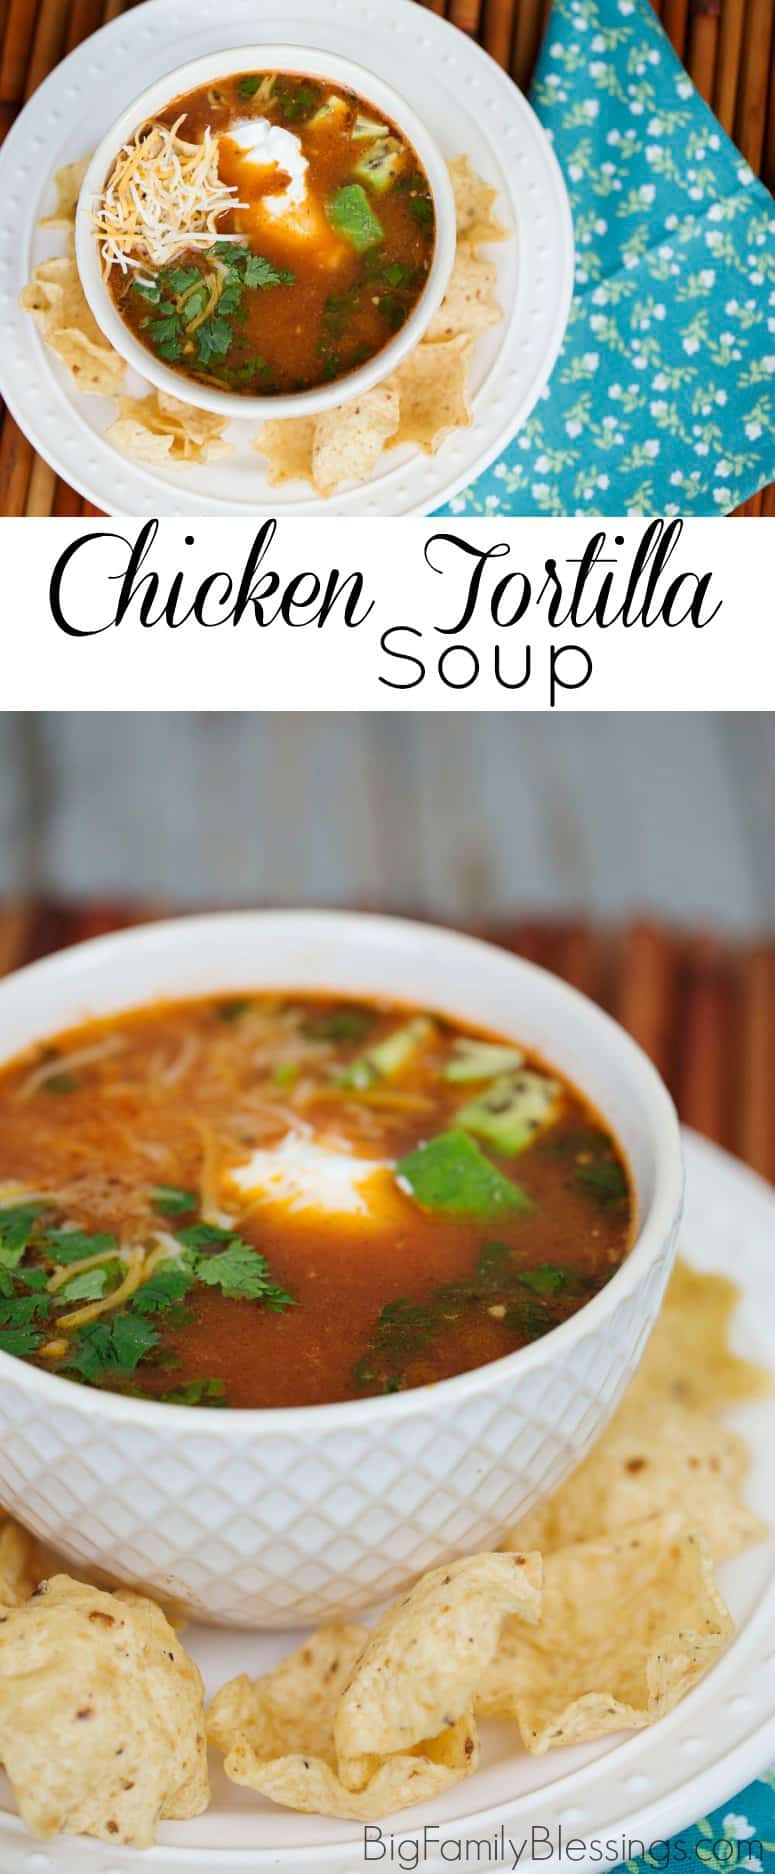 Not only is it super simple to cook, this Chicken Tortilla Soup tastes as good as any I've ever had at a restaurant!